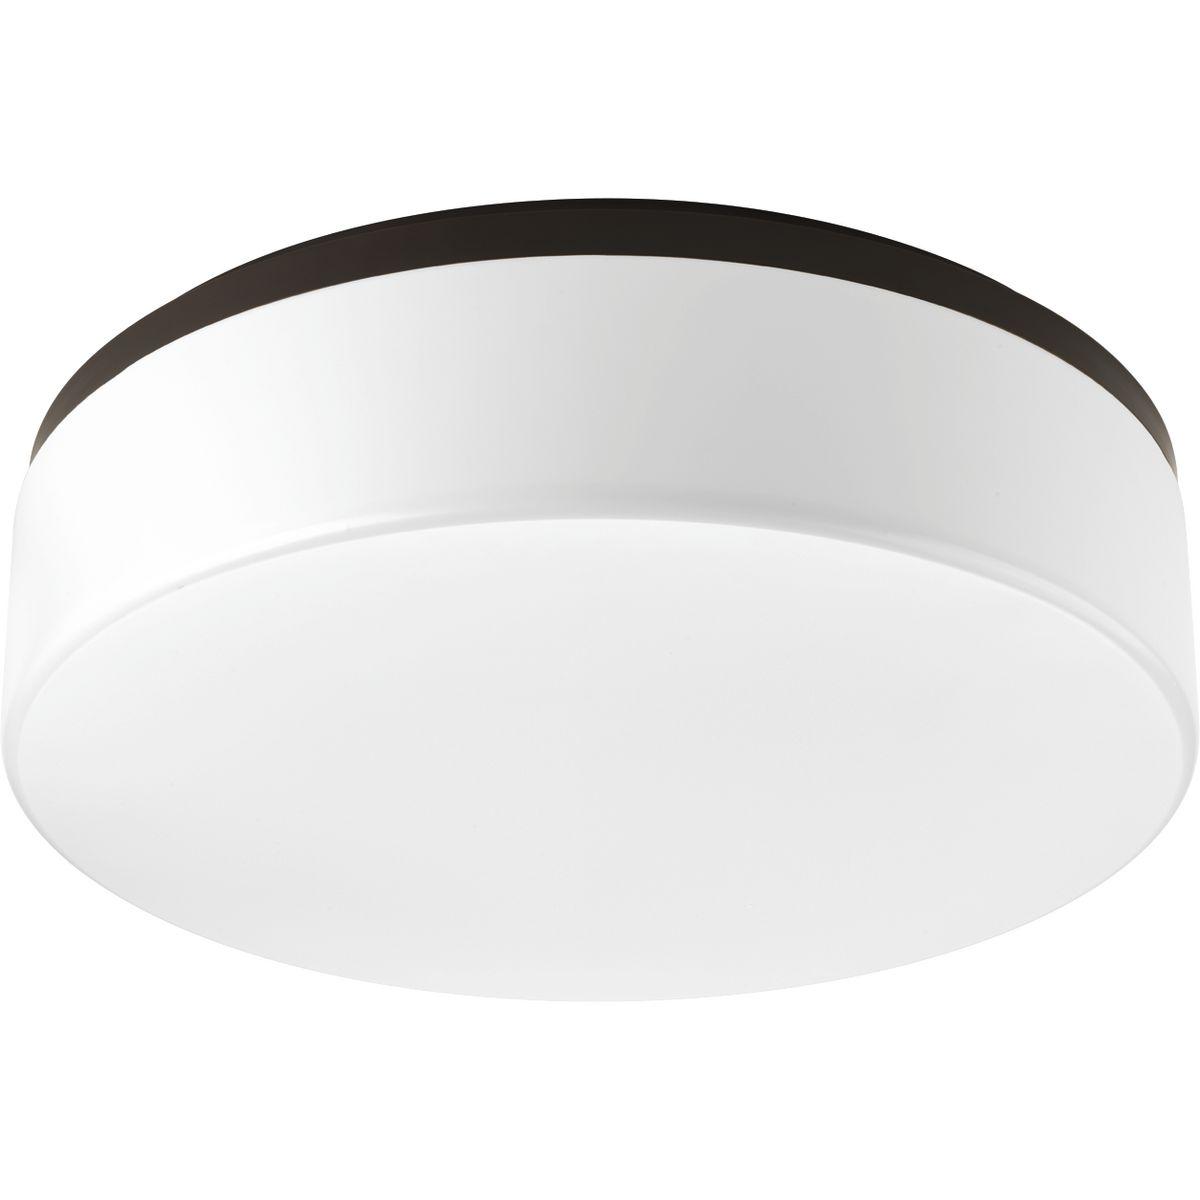 Hubbell P350078-020-30 18" LED flush mount with etched white opal acrylic diffuser with a clean modern look. 3000K color temperature and 90+ CRI. Acrylic bowl is attached with a twist and lock action for ease of installation. This fixture can be mounted on ceiling or wall. ENER